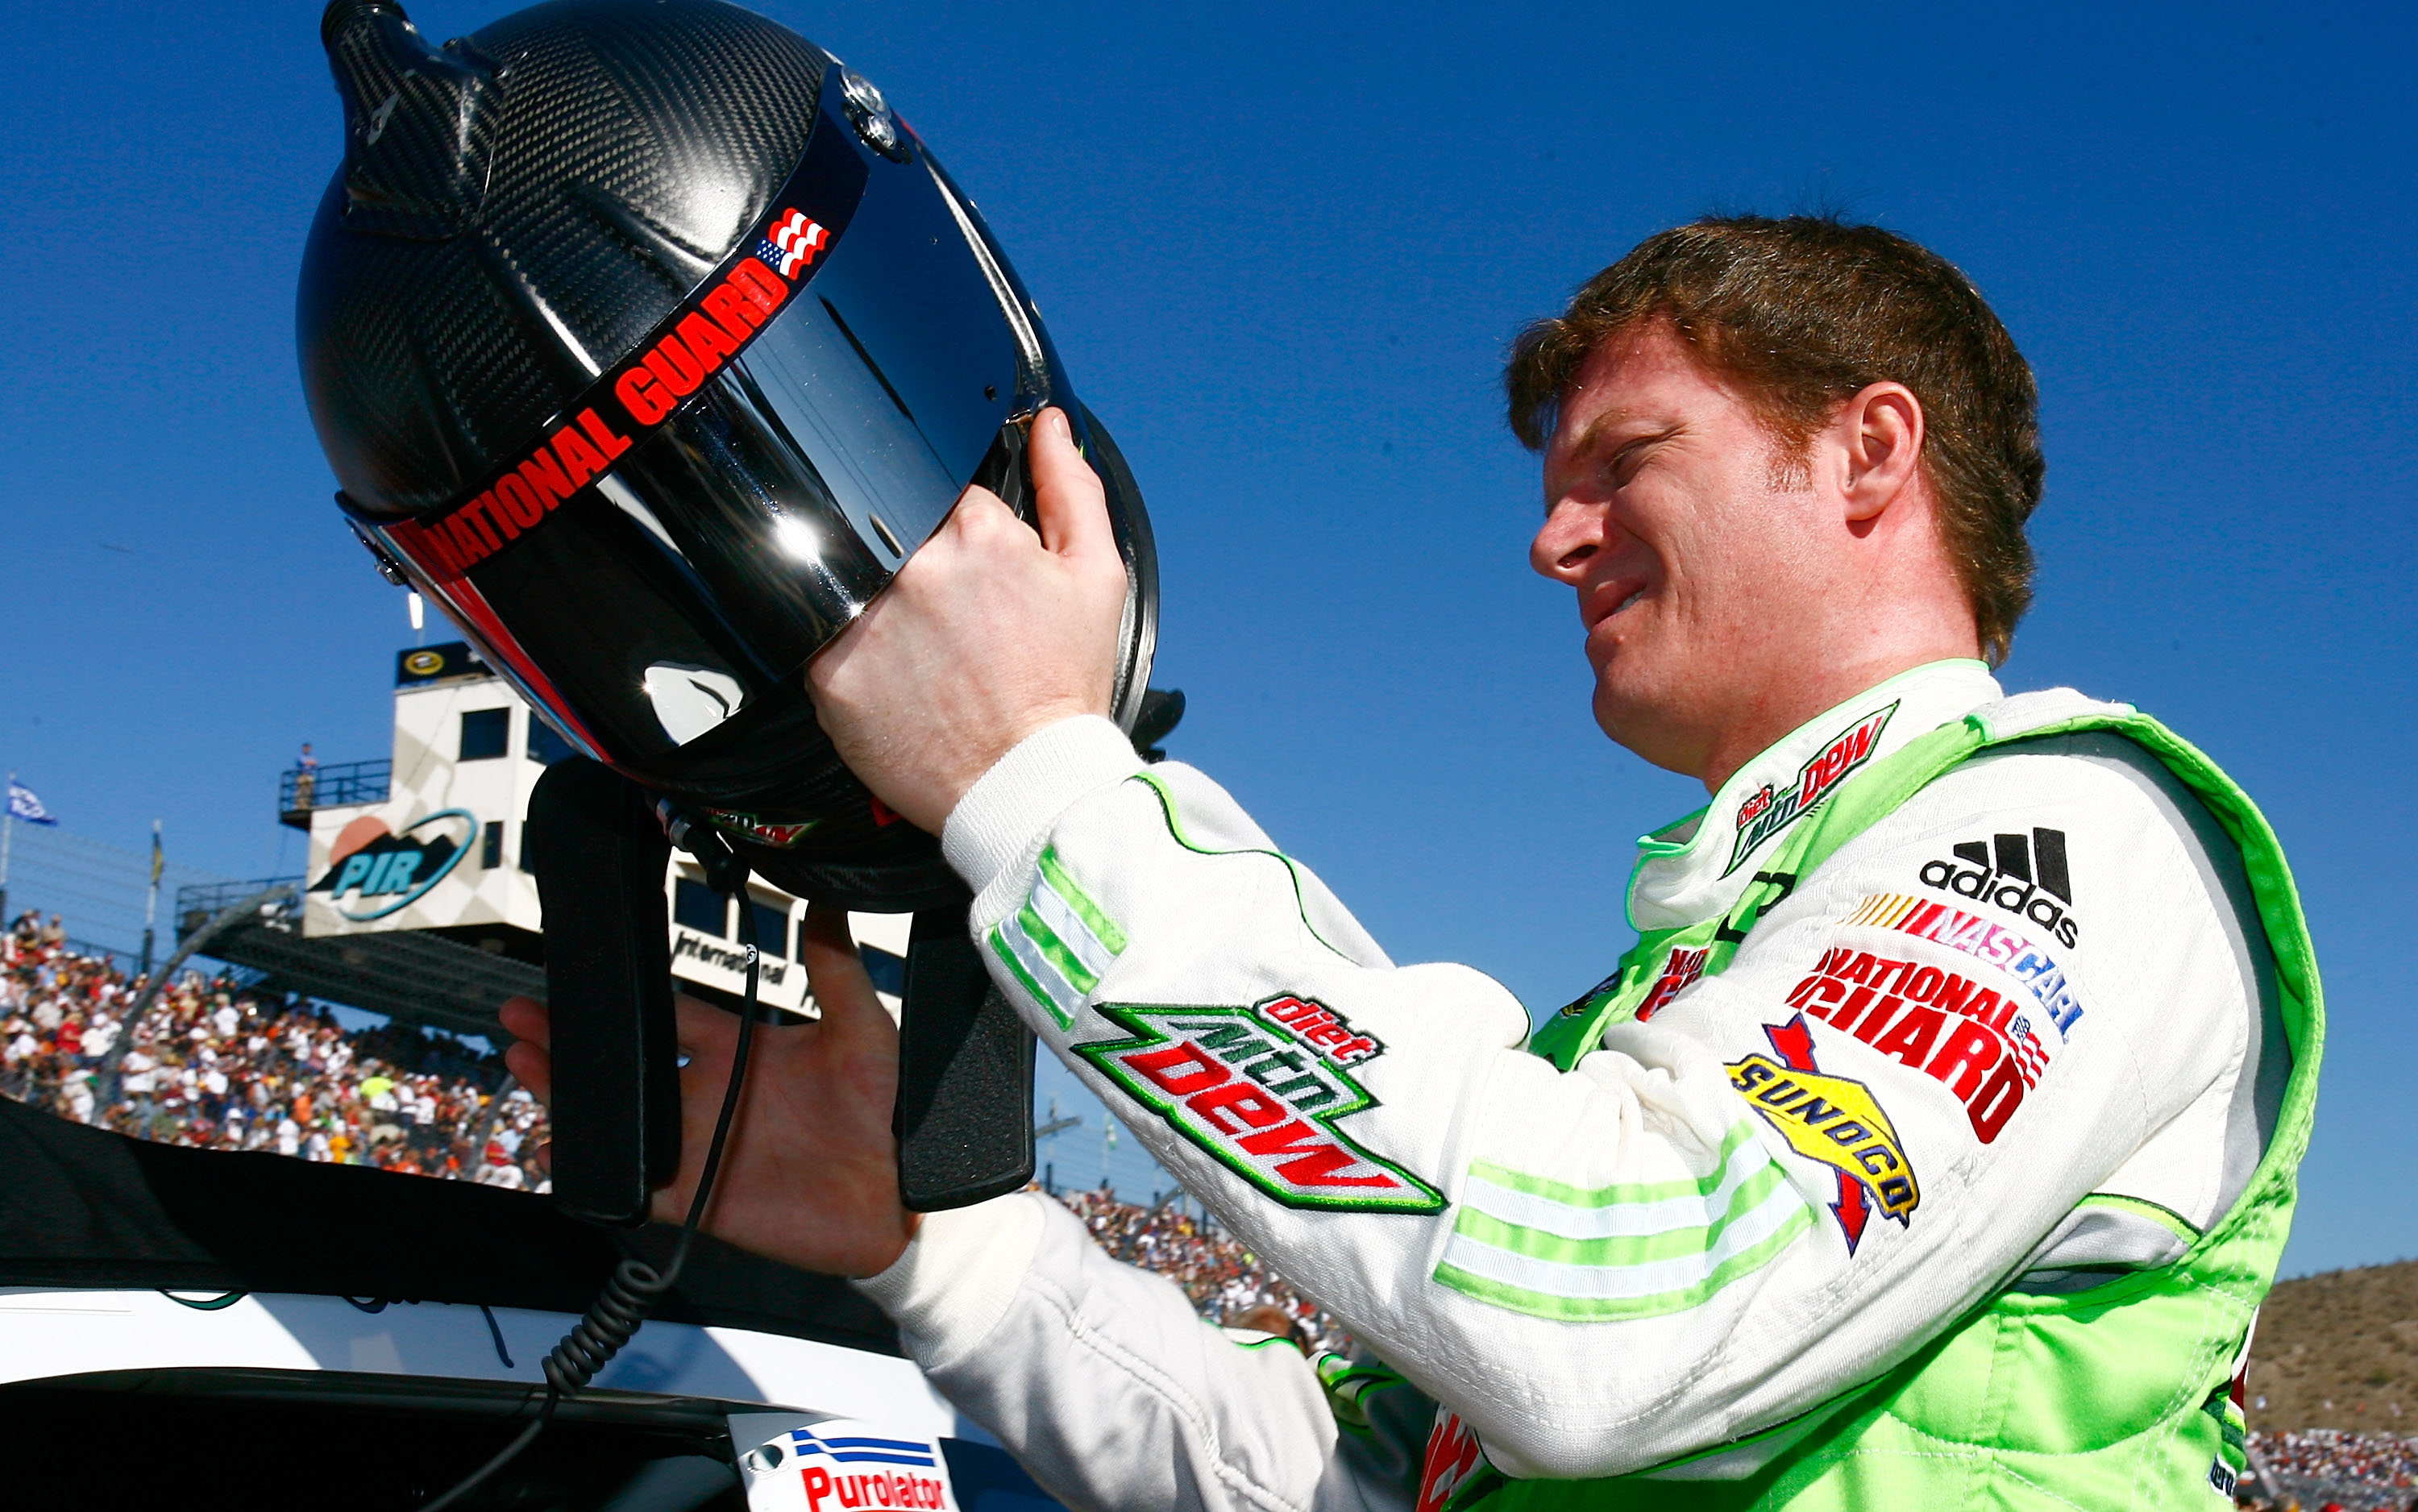 AVONDALE, AZ - NOVEMBER 14:  Dale Earnhardt Jr., driver of the #88 Diet Mountain Dew Chevrolet, prepares to drive prior to the NASCAR Sprint Cup Series Kobalt Tools 500 at Phoenix International Raceway on November 14, 2010 in Avondale, Arizona.  (Photo by